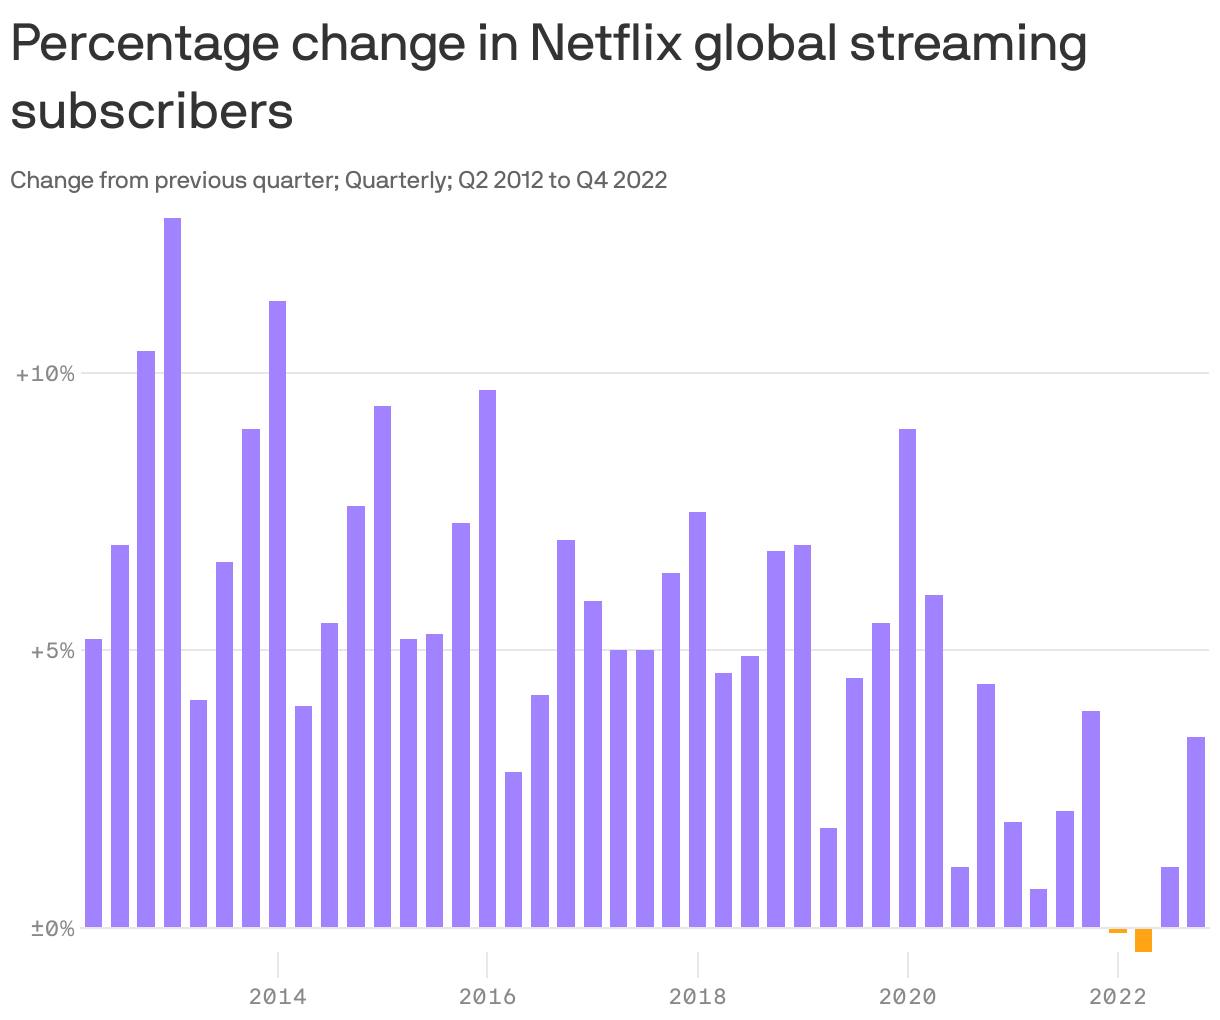 Percentage change in Netflix global streaming subscribers